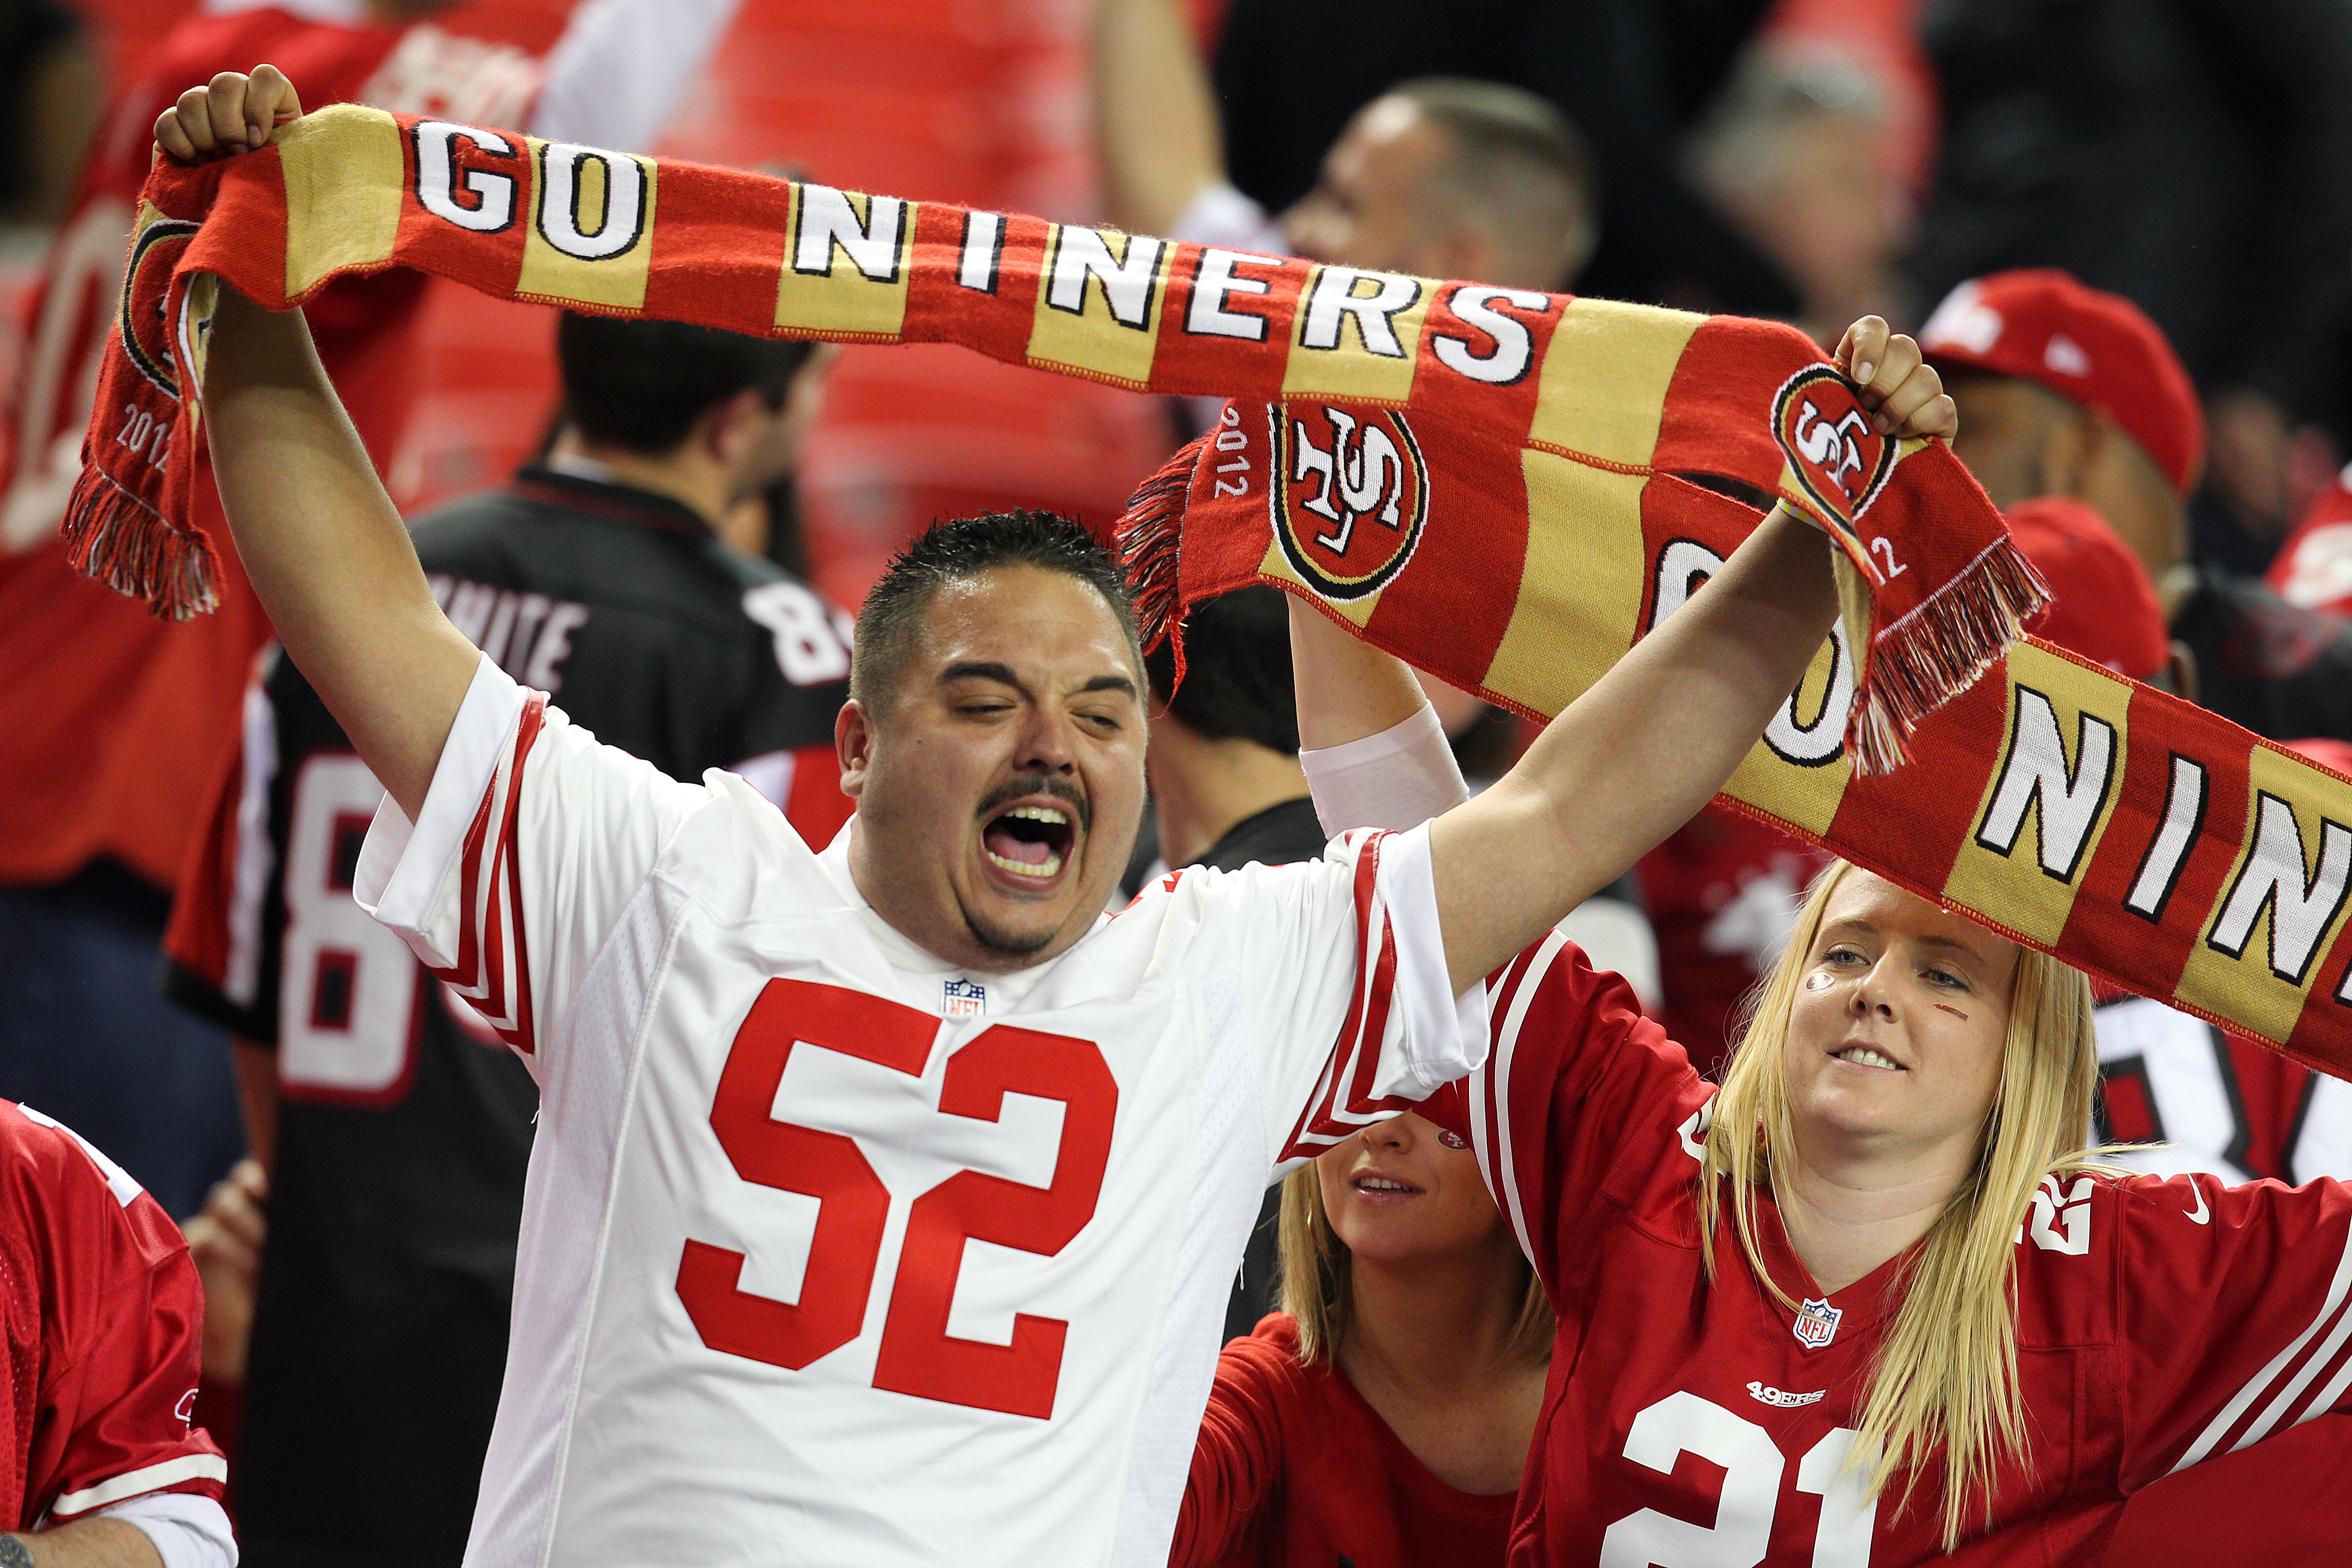 For Niners fans, Super Bowl tickets are scarce and expensive - CBS News4896 x 3264